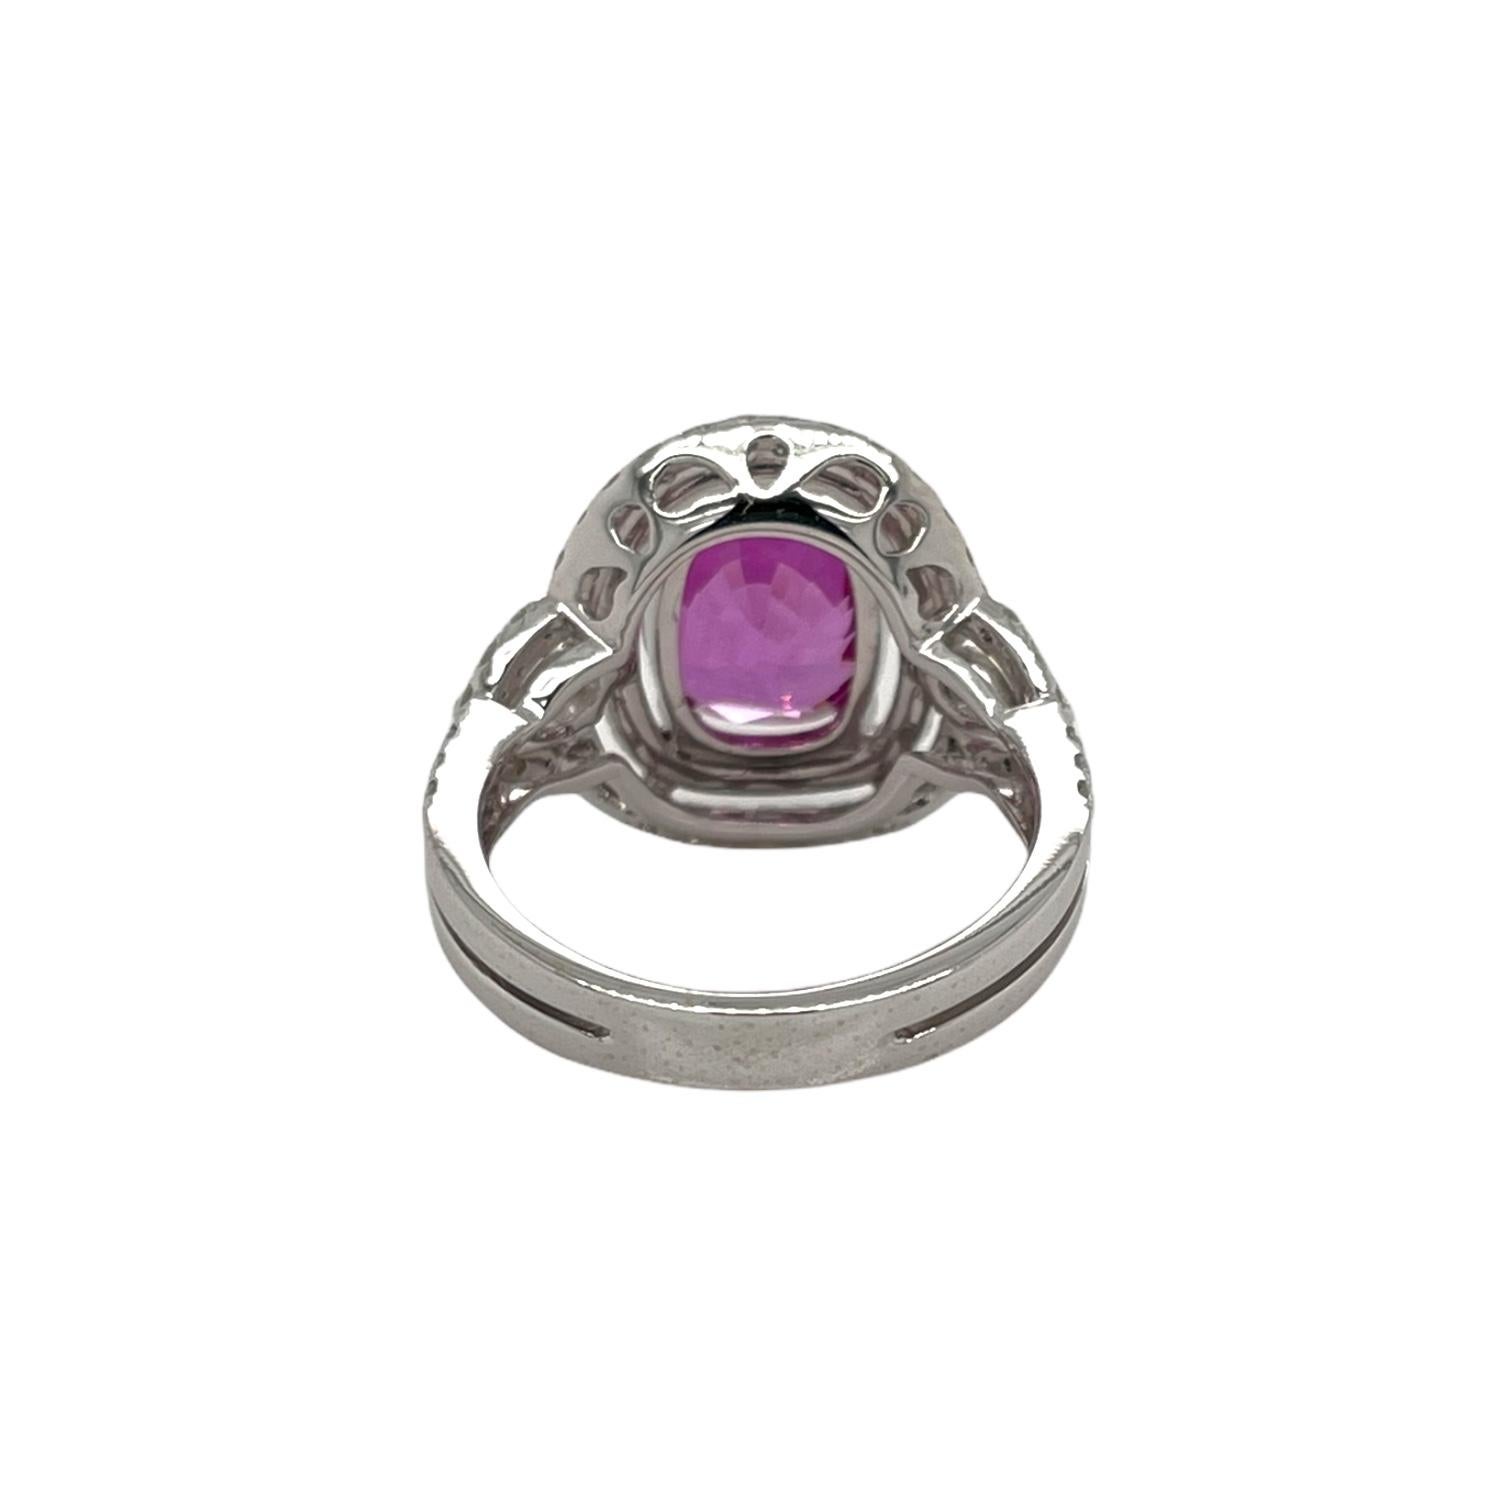 Romantic GIA Certified Pink Sapphire & Diamond Ring in 18K White Gold